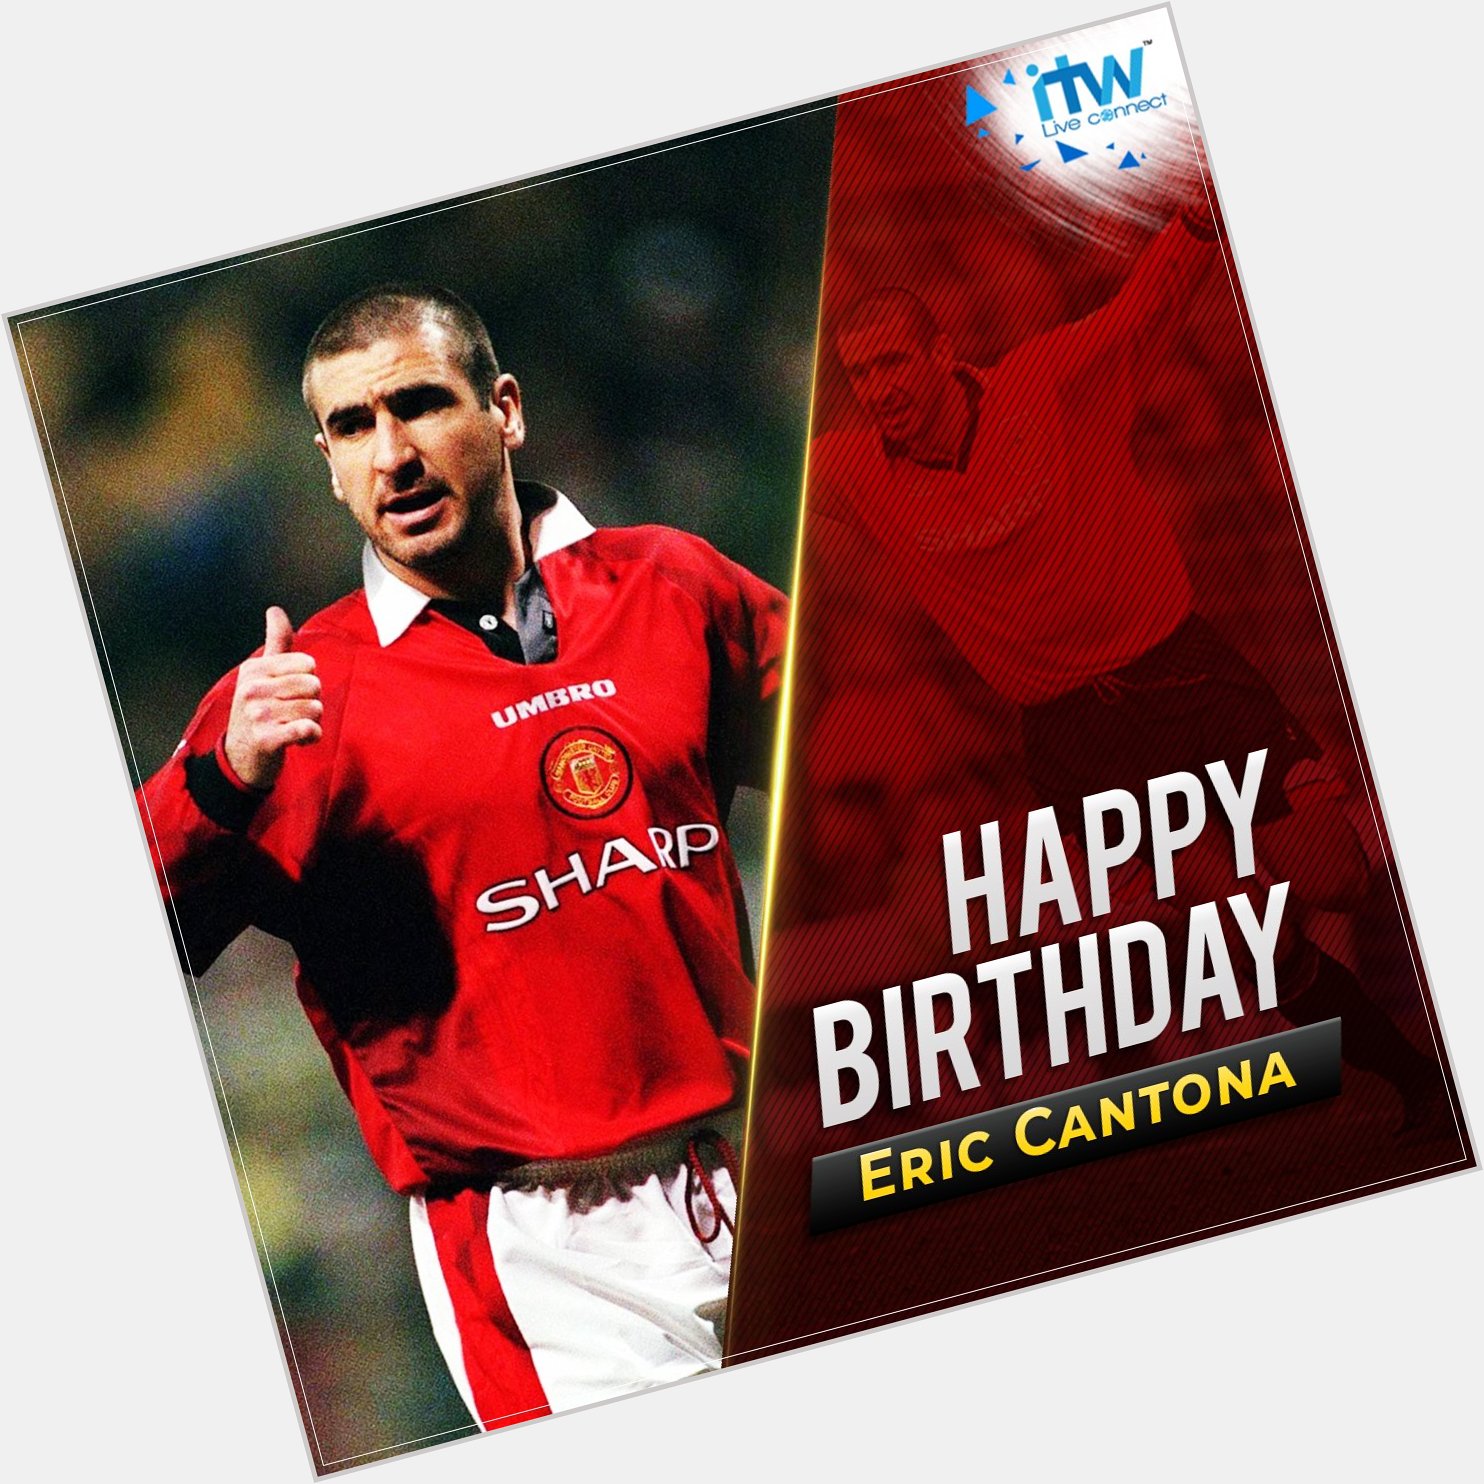 Wishing and Legend Eric Cantona a very Happy Birthday! \"The King\" turns 52 today. 